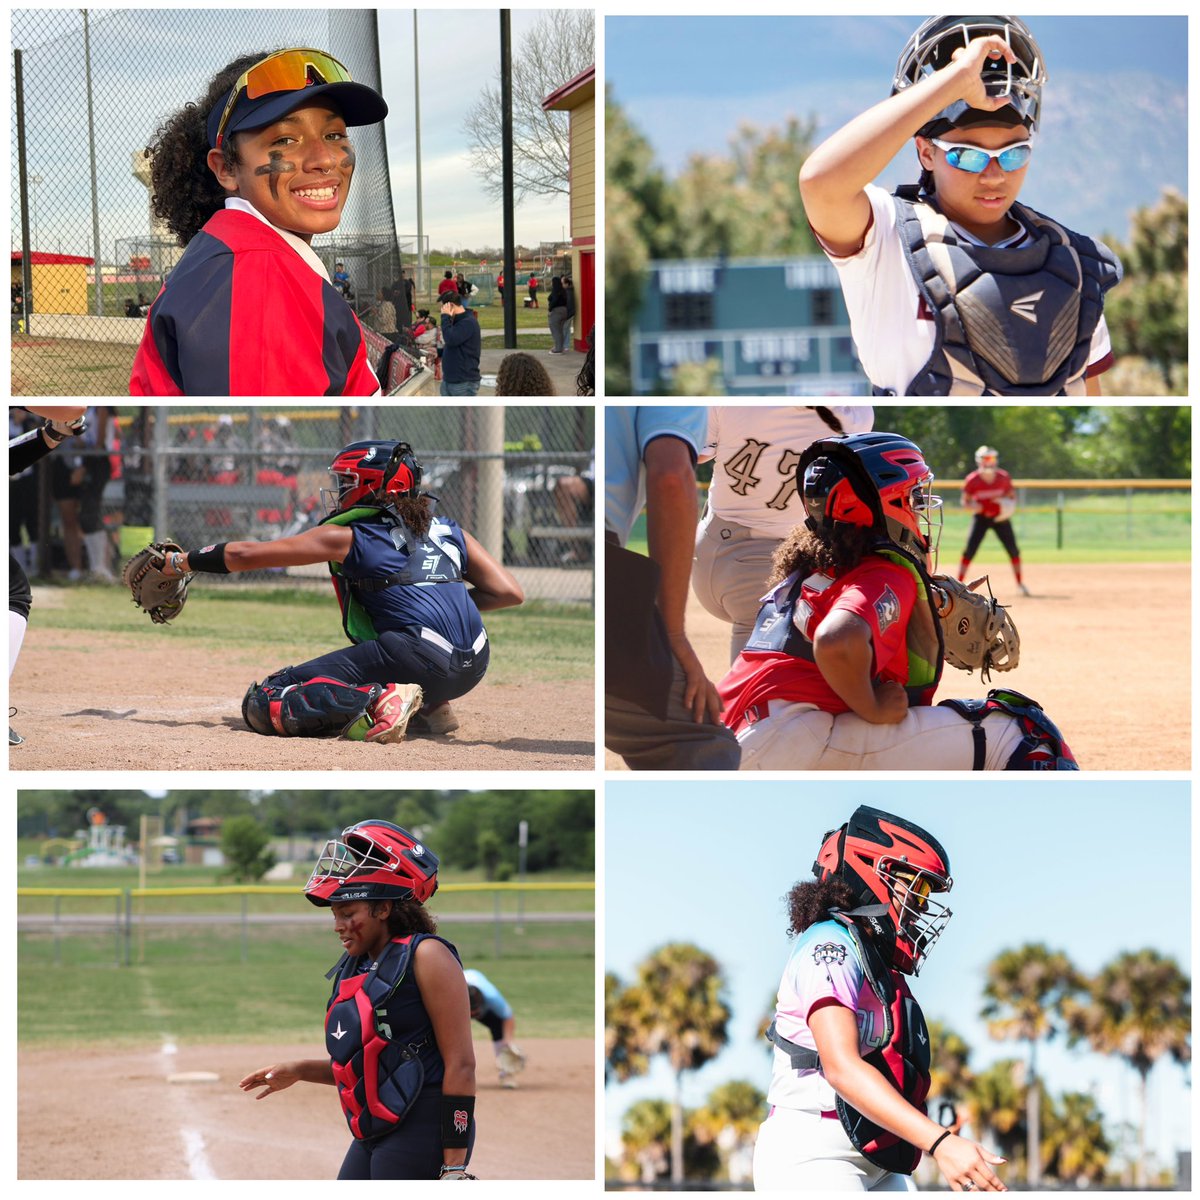 Happy National Catcher’s Day to all the beasts behind the plate! We see you and we celebrate you today! @FbDulles @DHSAthletics550 @AMAH_Herrera @FBISDAthletics @Estrada71Ray